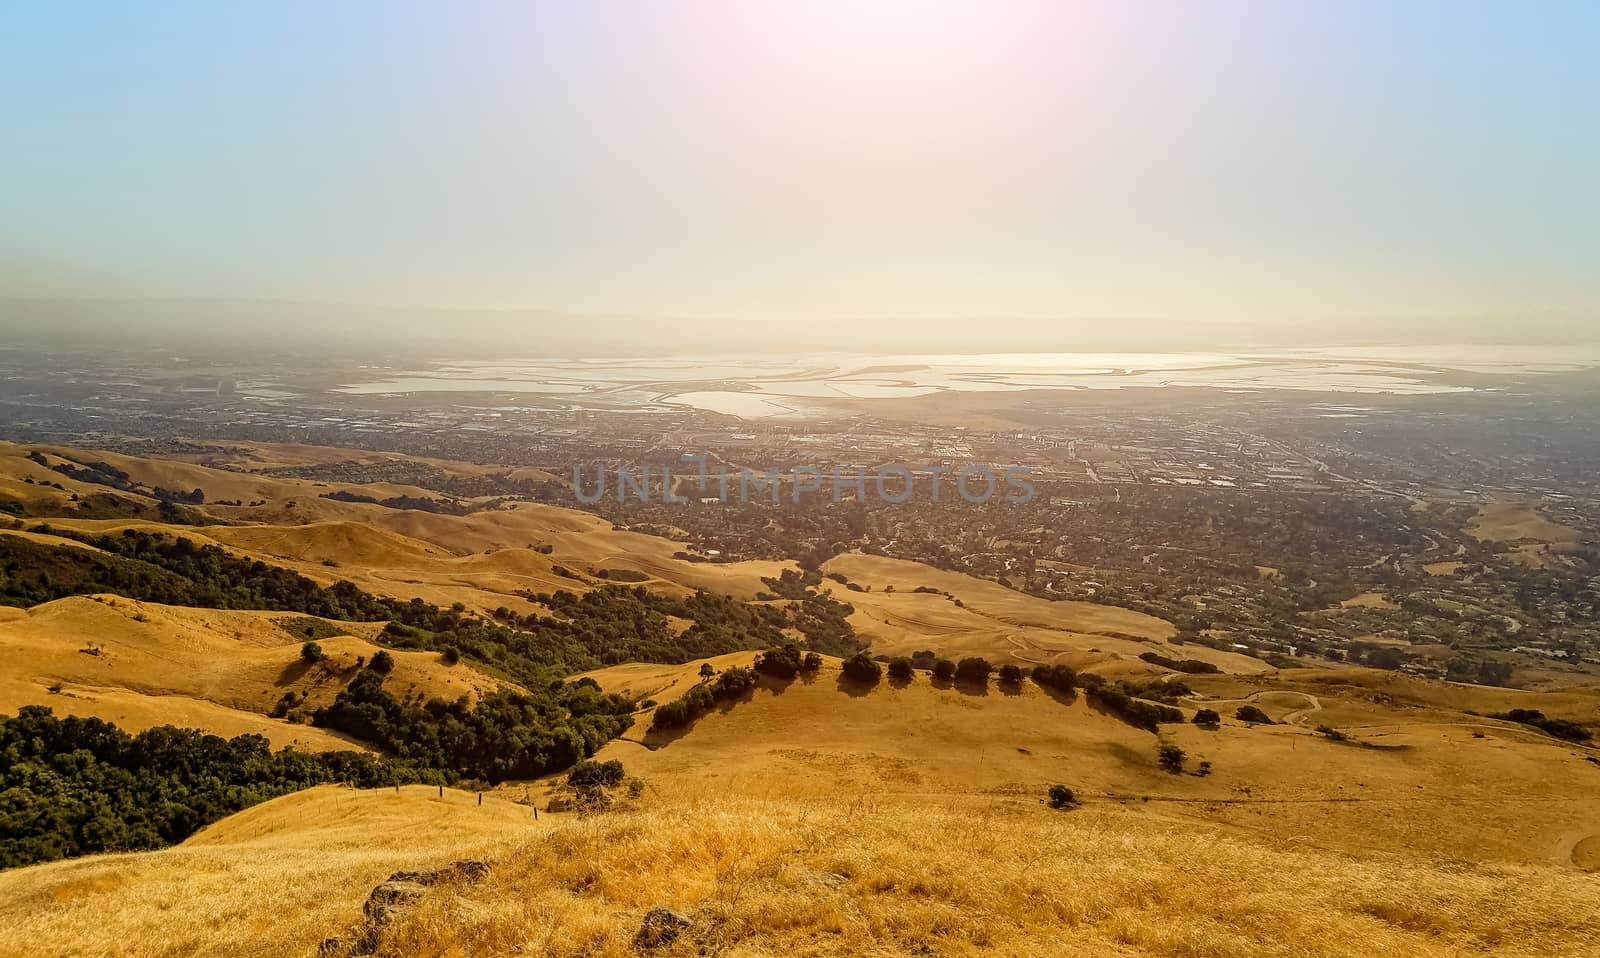 South East part of San Francisco Bay, also known as Silicon Valley, seen from Mission Peak on a hazy afternoon.